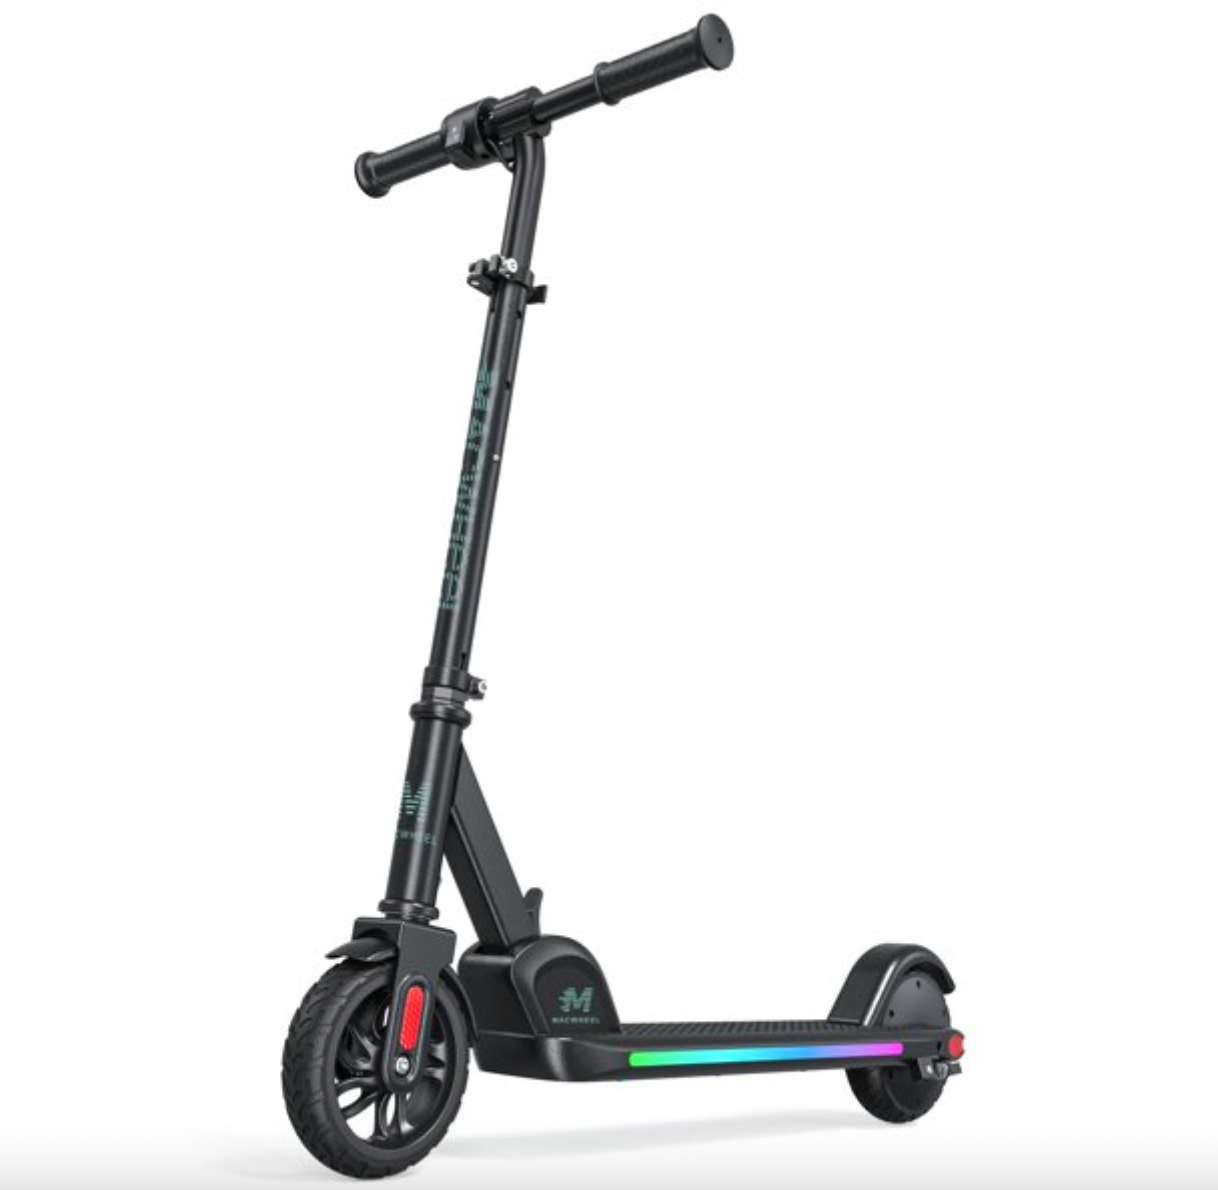 Macwheel Electric Scooter